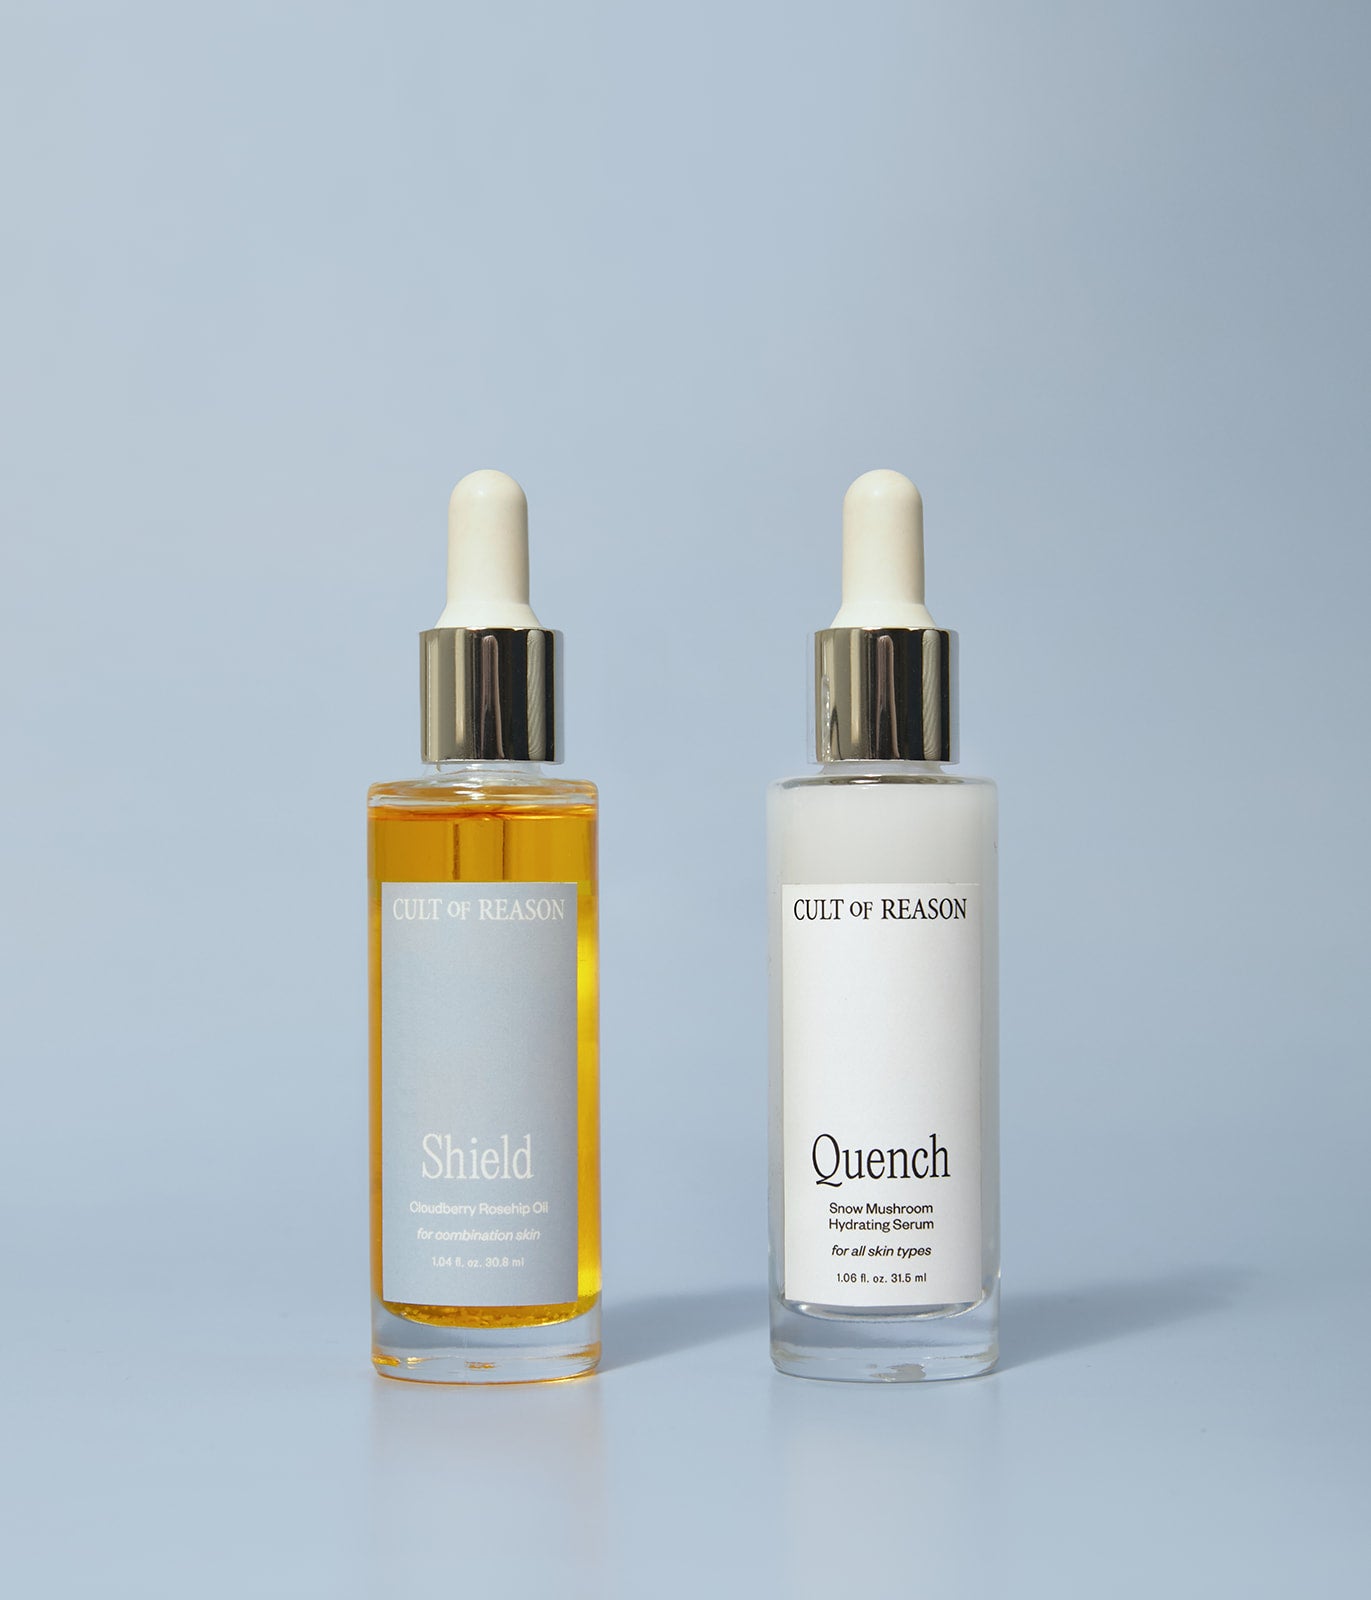 Picture of Cult of Reason skin care duo Shield, a Vitamin C and bakuchiol facial oil, and Quench, a super hydrating serum made from snow mushroom, on blue background